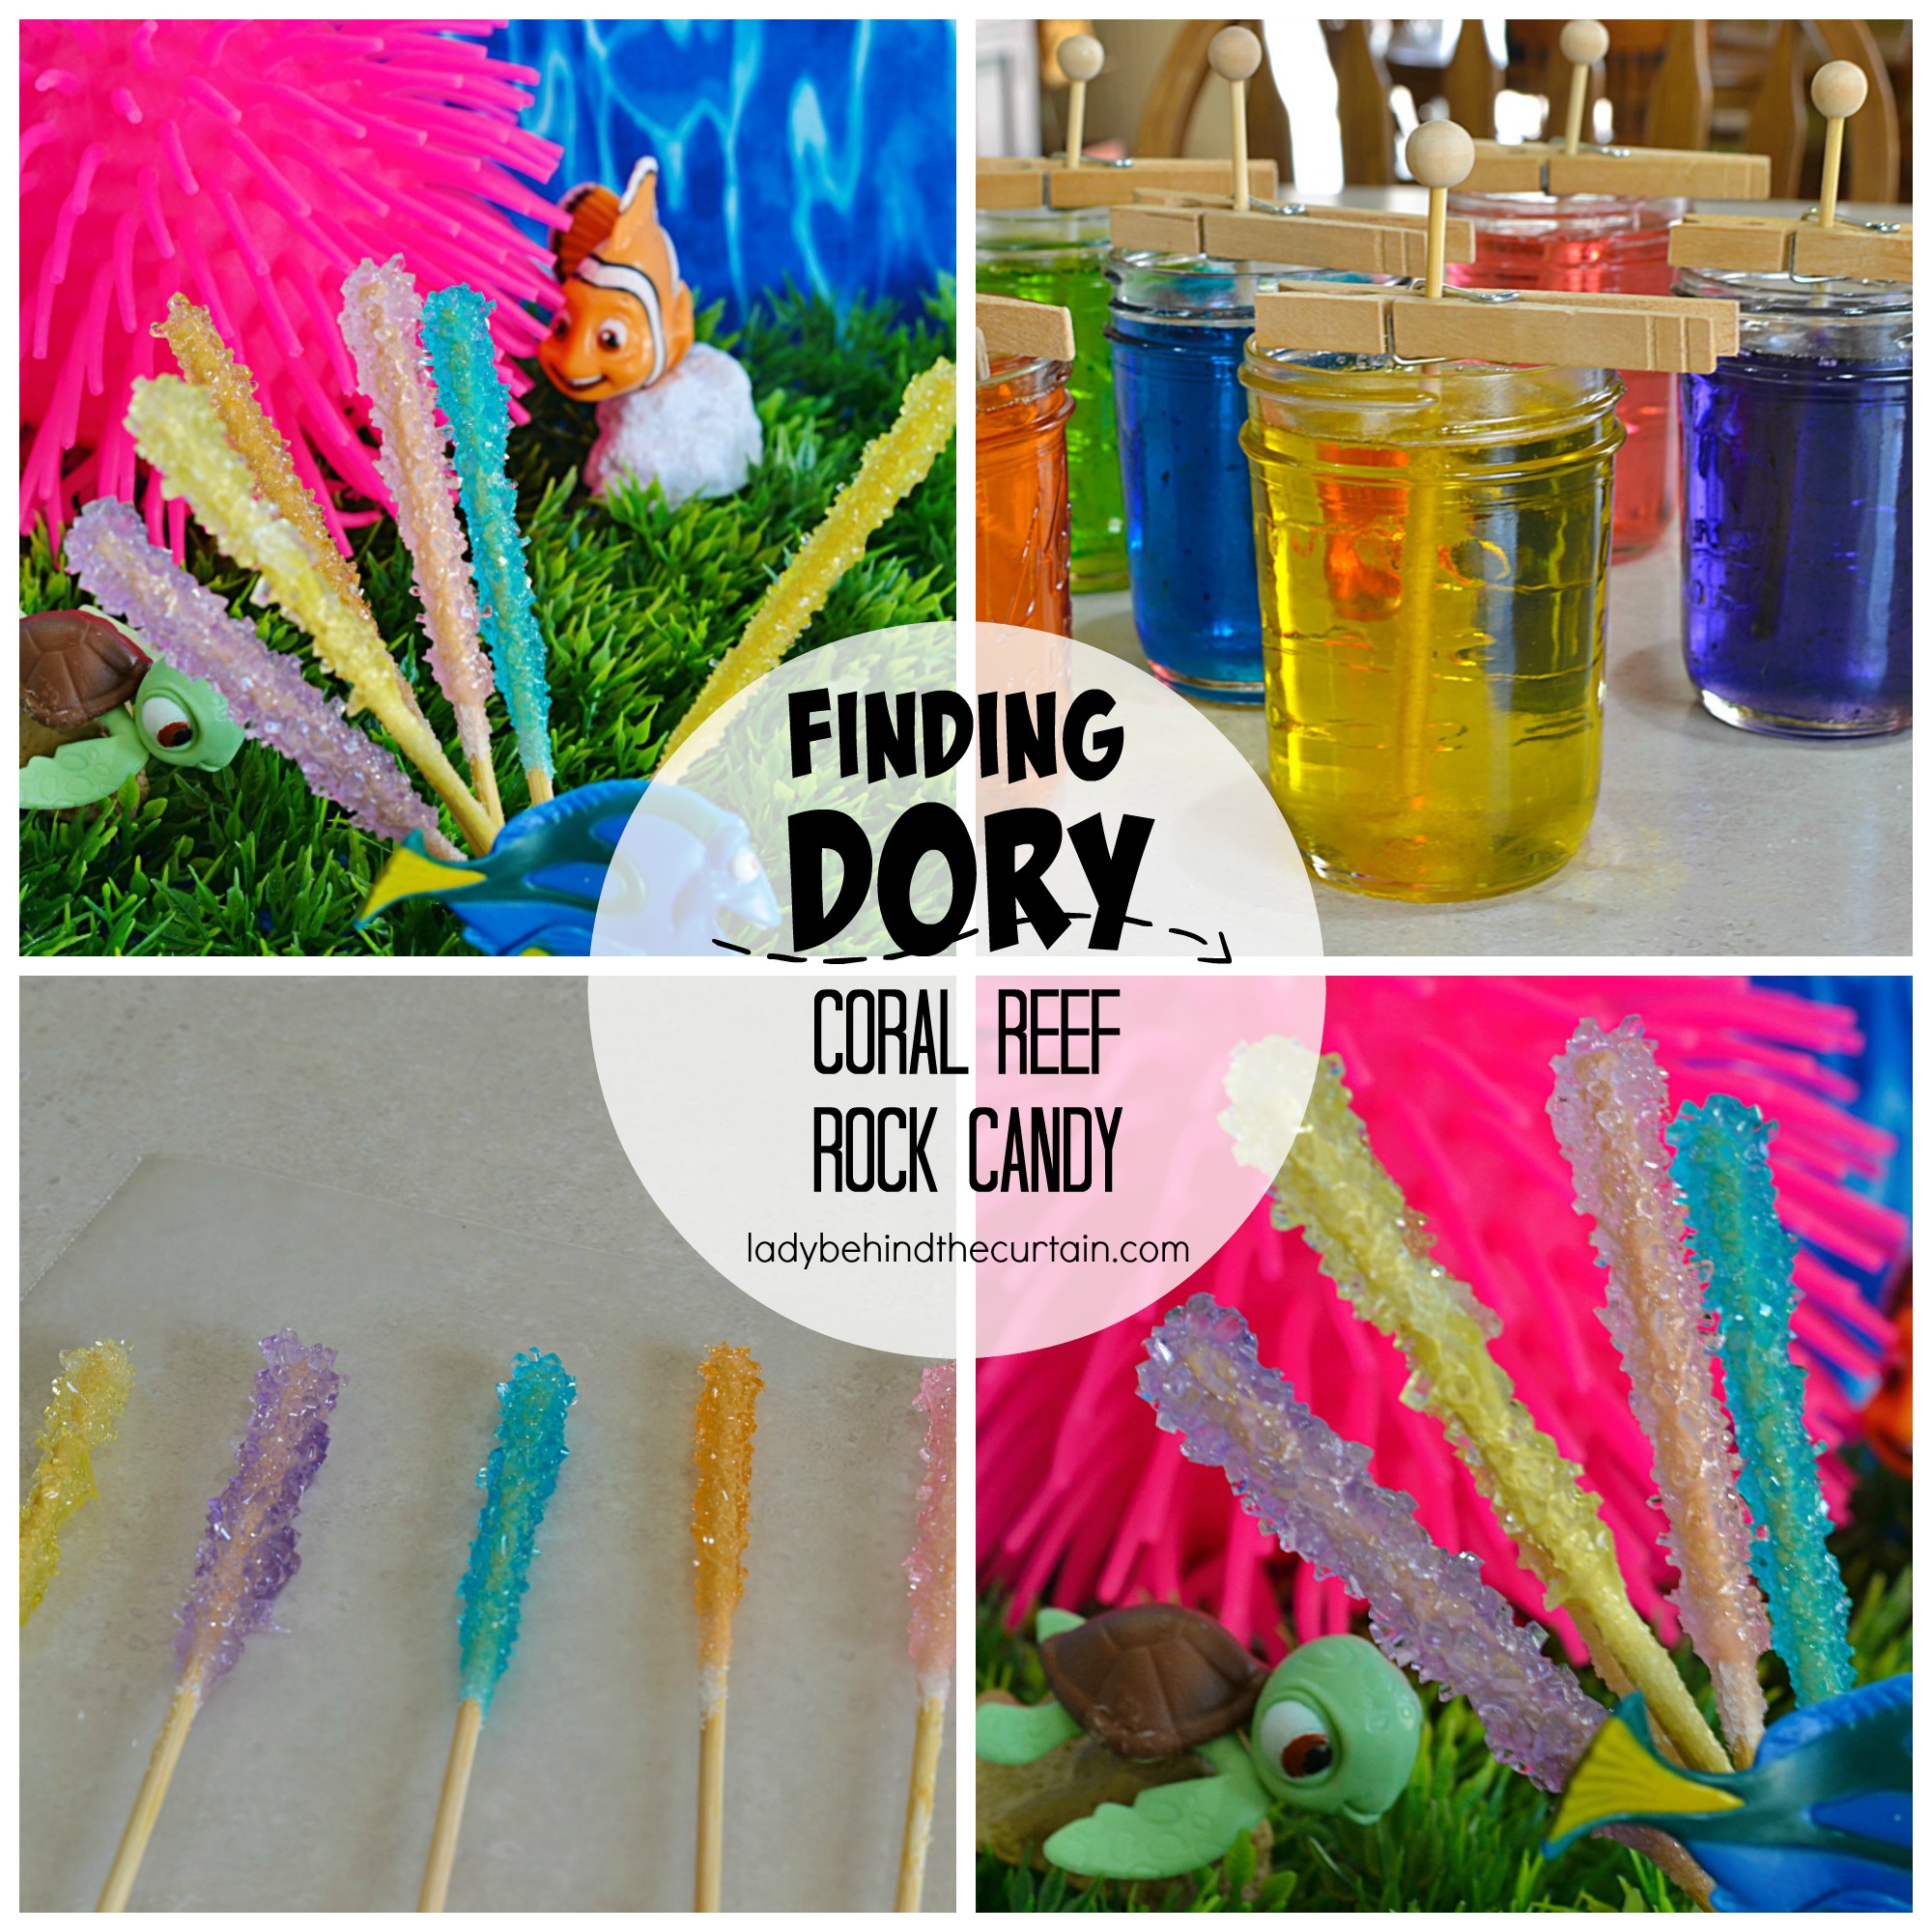 How to Make Finding Dory Coral Reef Rock Candy | With just two ingredients you can create your own science project this summer by making your own rock candy!